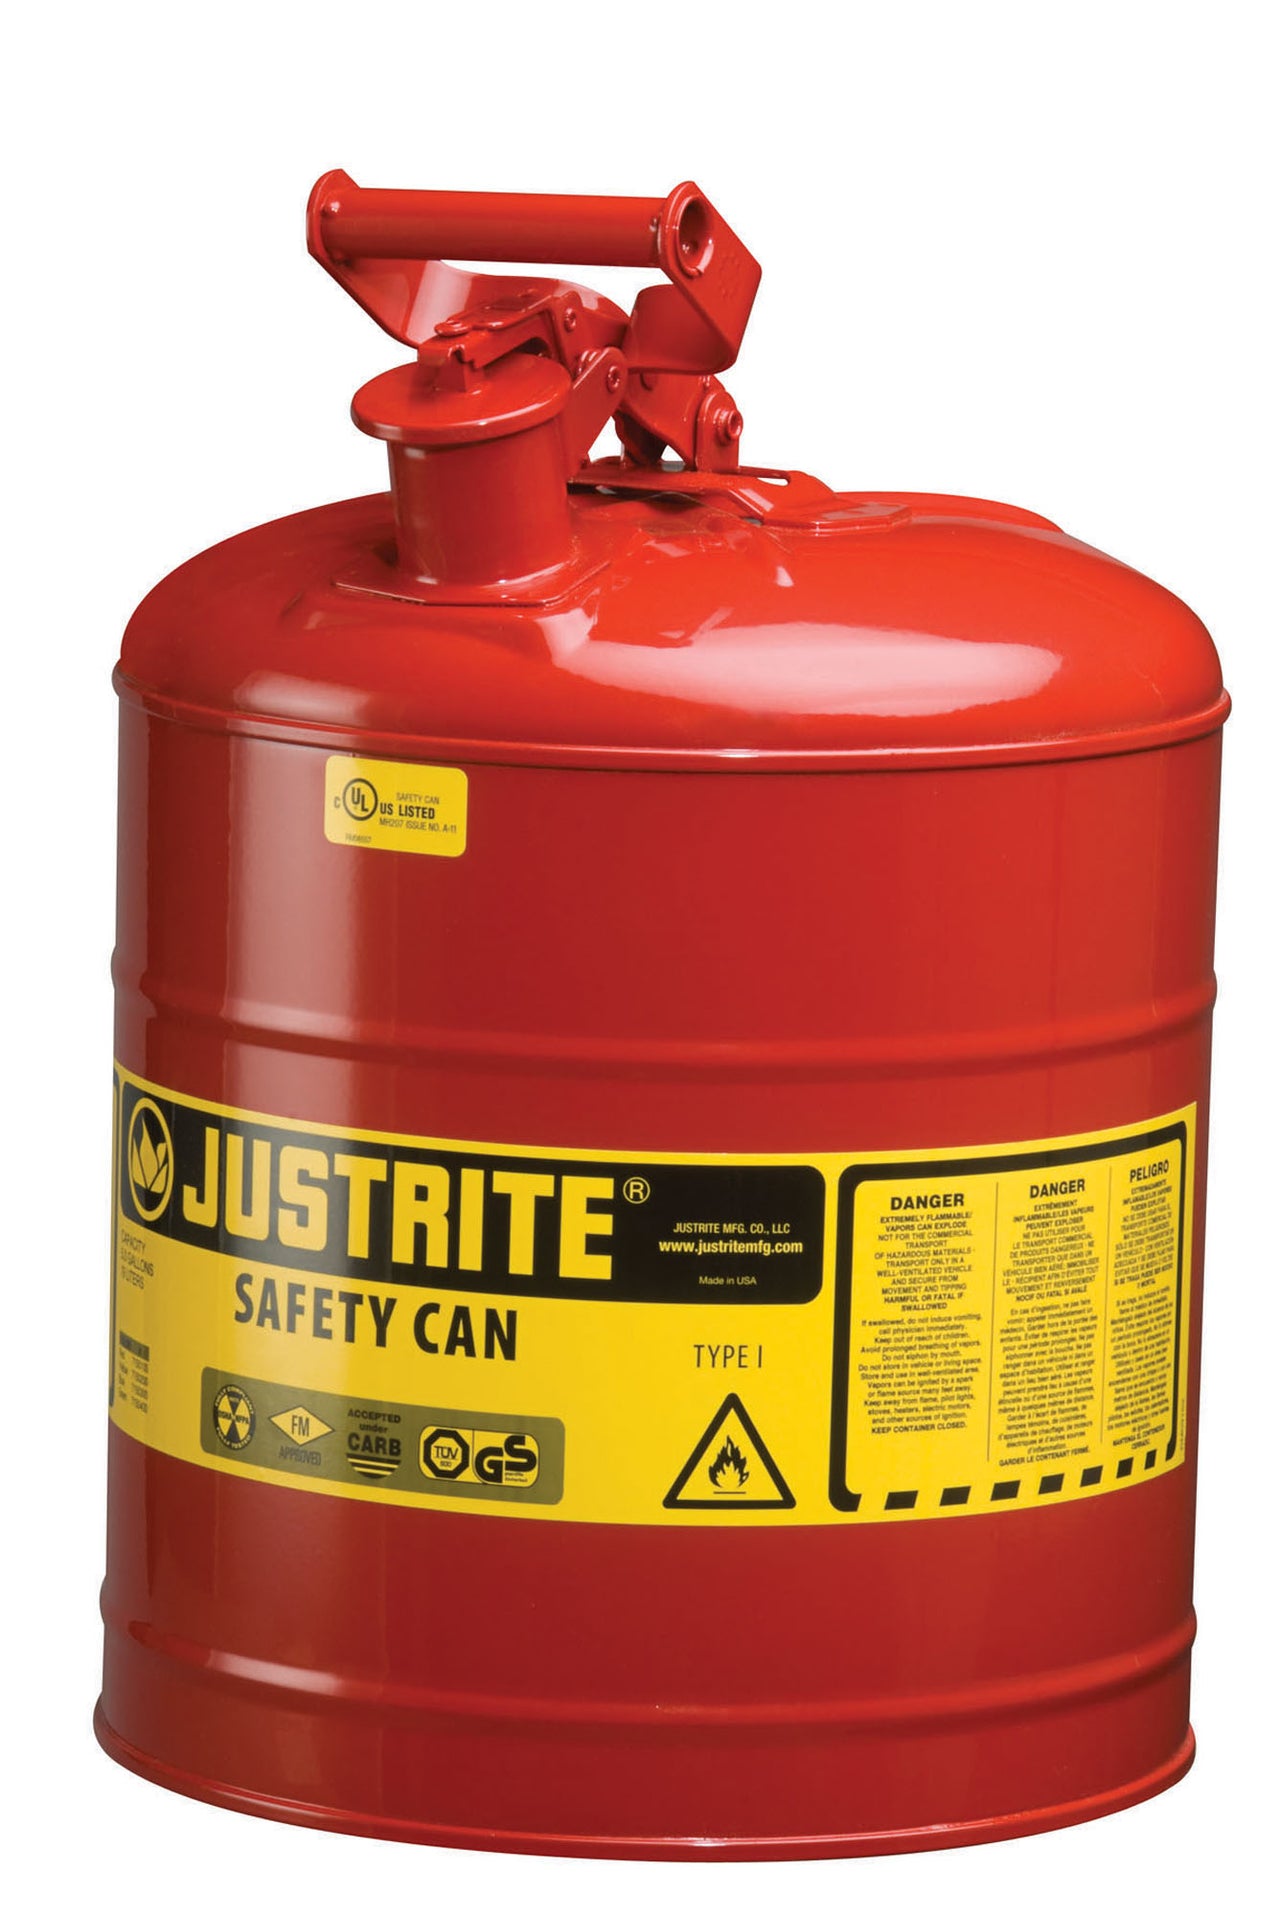 Justrite 5-Gallon Steel Type I Safety Can